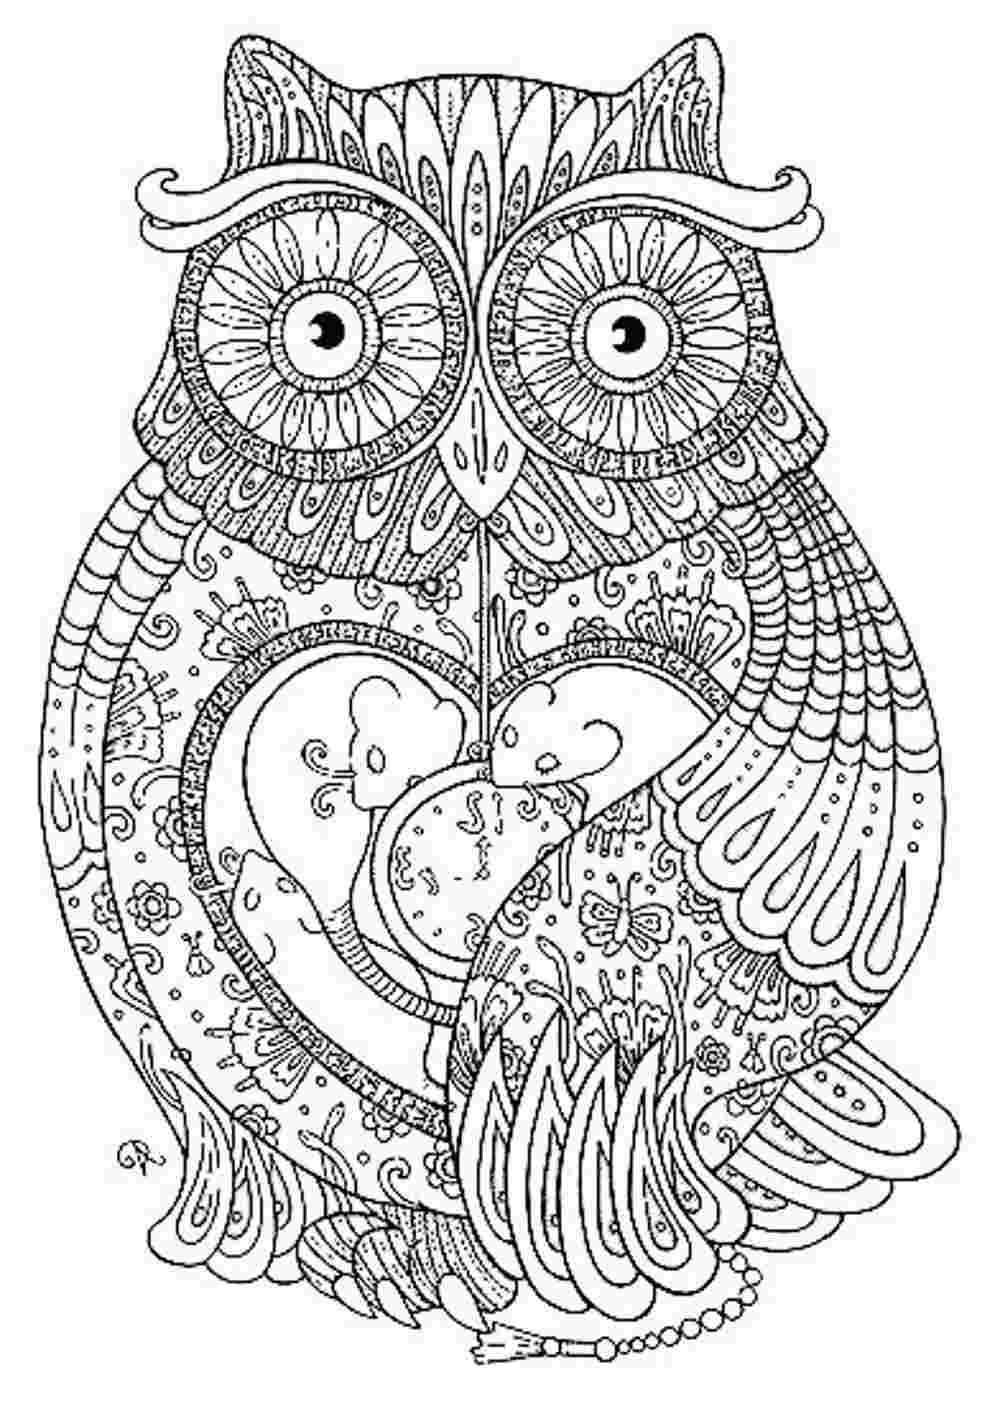 Free Colouring Pages For Adults   Only Coloring Pages   Coloring Home